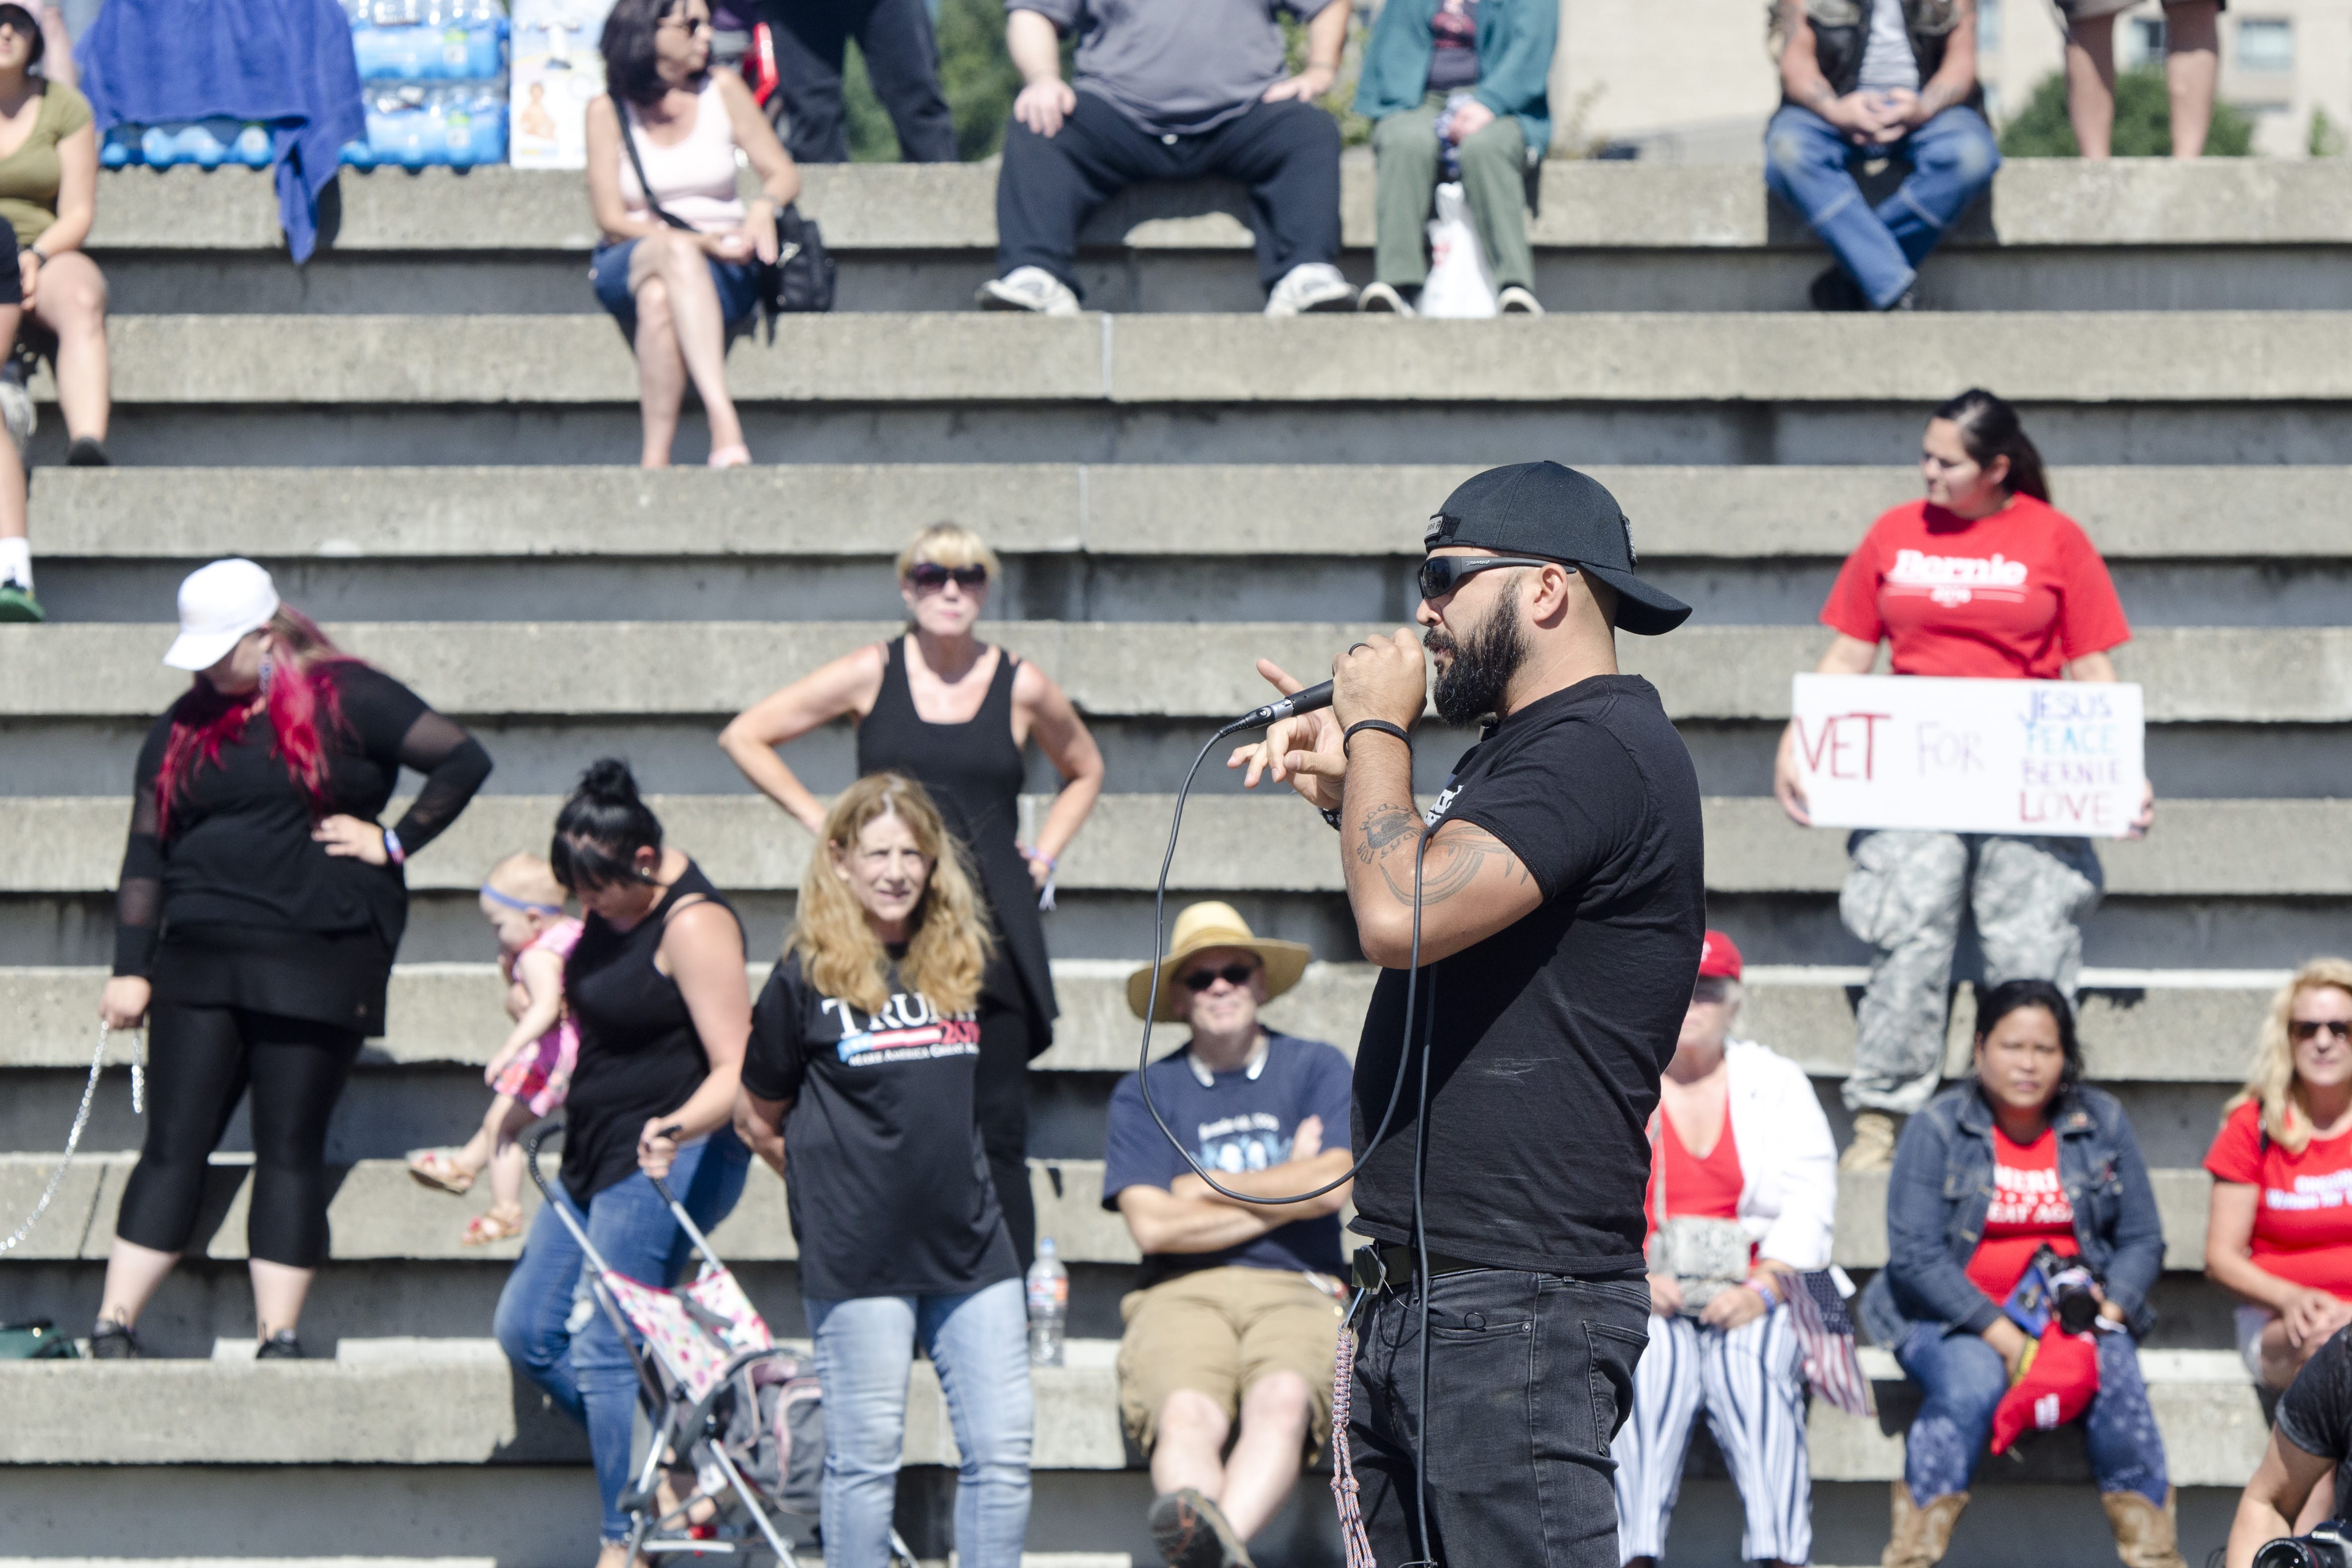 Joey Gibson speaks at a rally held by his Patriot Prayer Group at the Port of Vancouver Amphitheater in September. The event was moved to Vancouver from Portland in an attempt to avoid protesters.